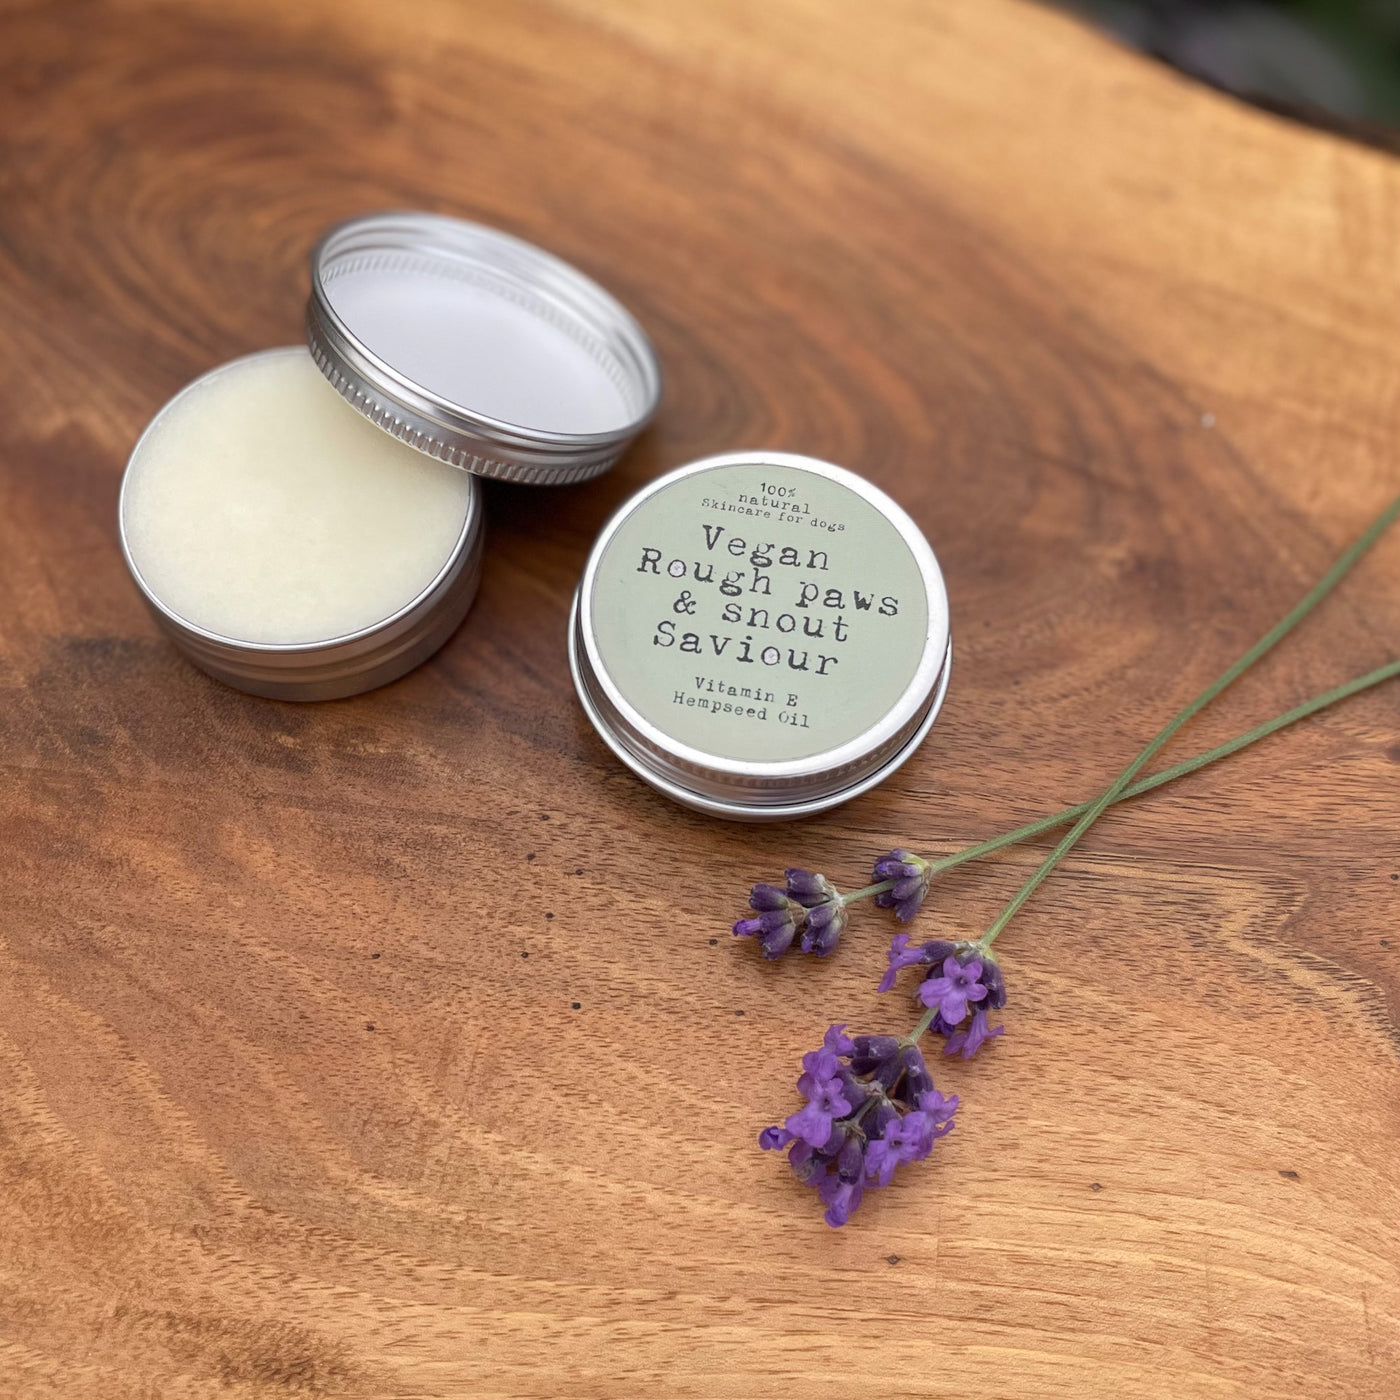 Vegan Rough Paws and Nose Dog Soothing Balm vegan-friendly 100% natural skincare for dogs.